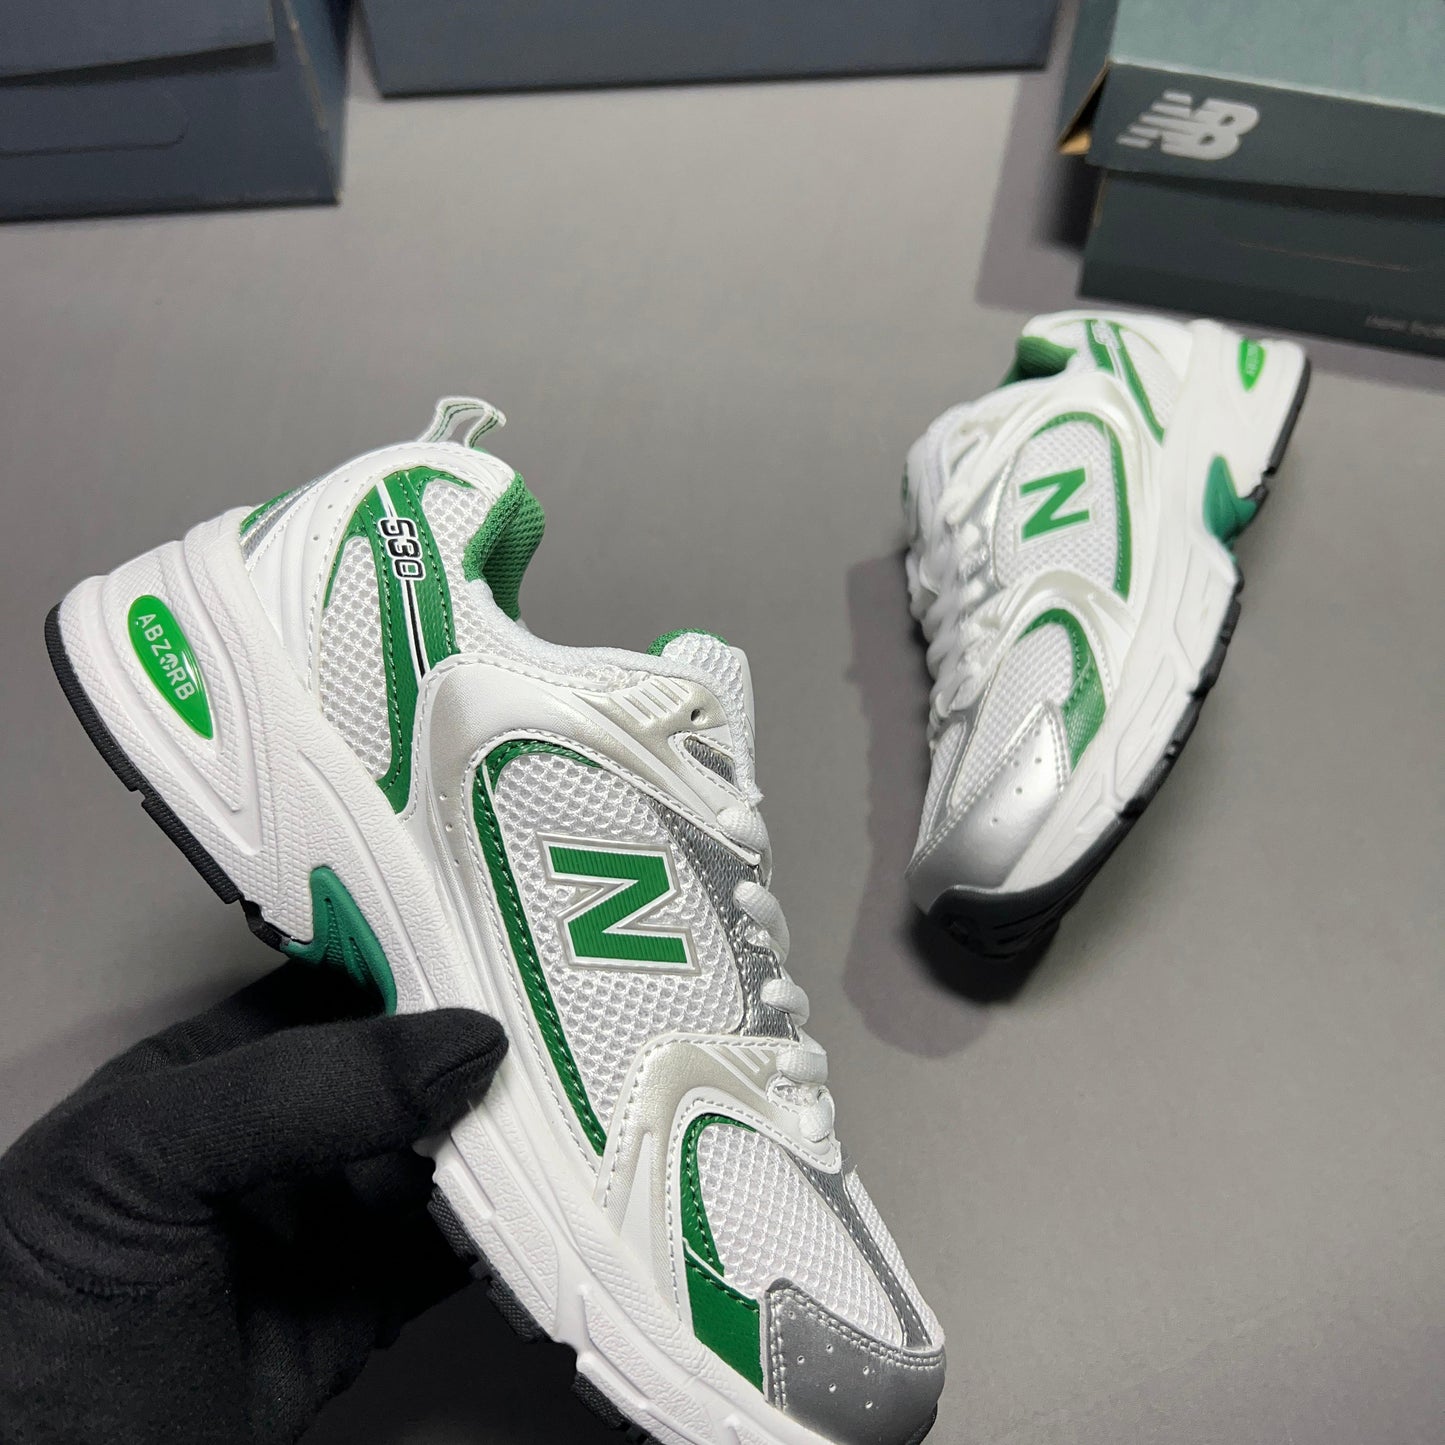 New Balance 530 Green/Silver First Copy Shoes